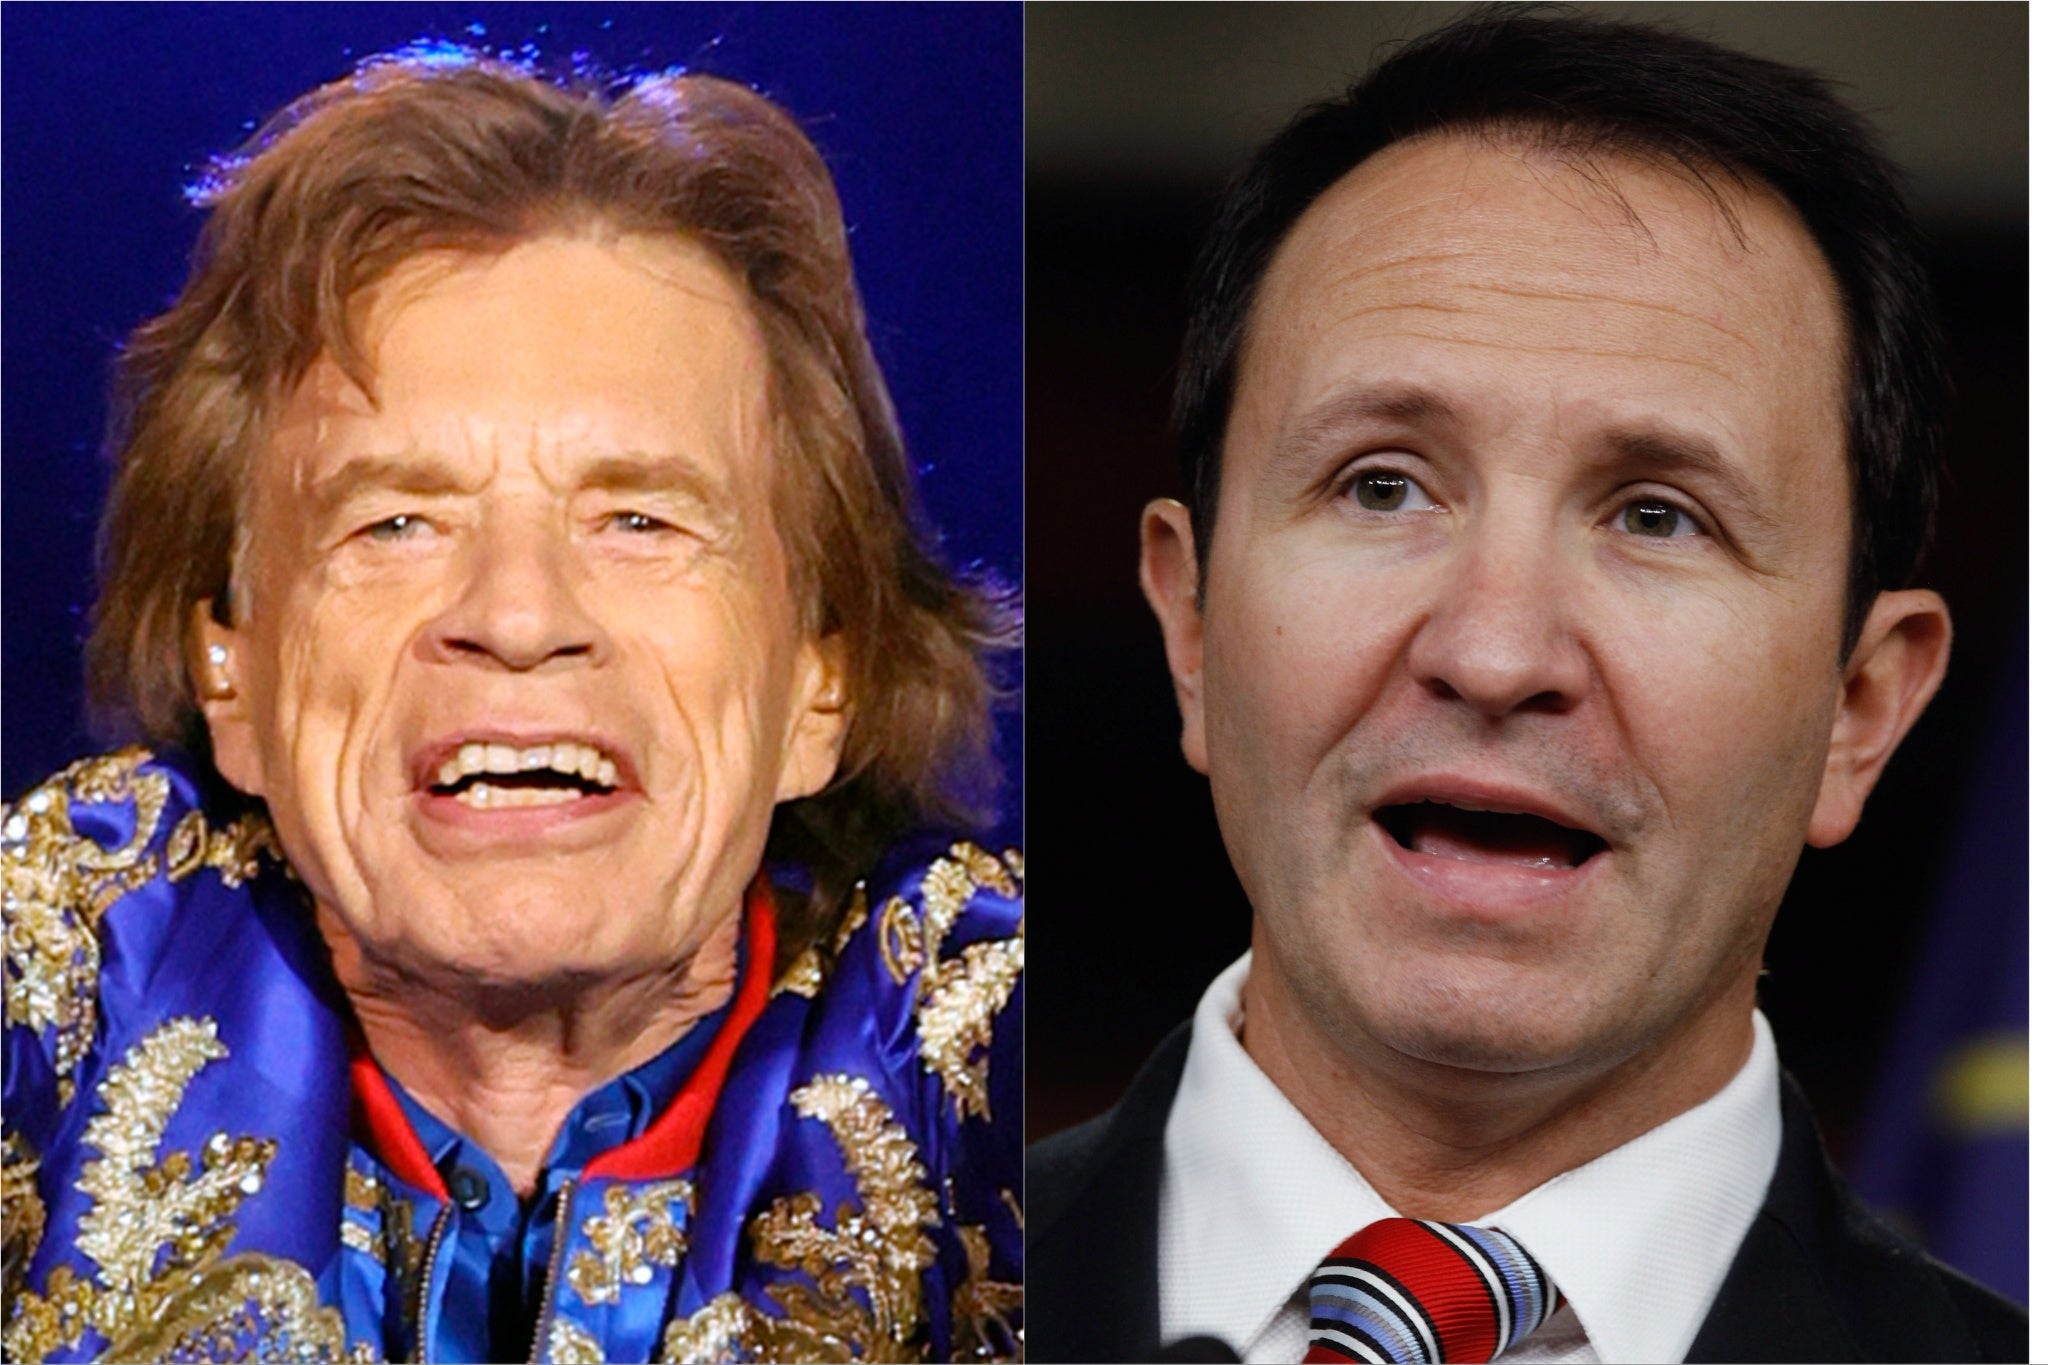 Mick Jagger (left) and Jeff Landry, governor of Louisiana